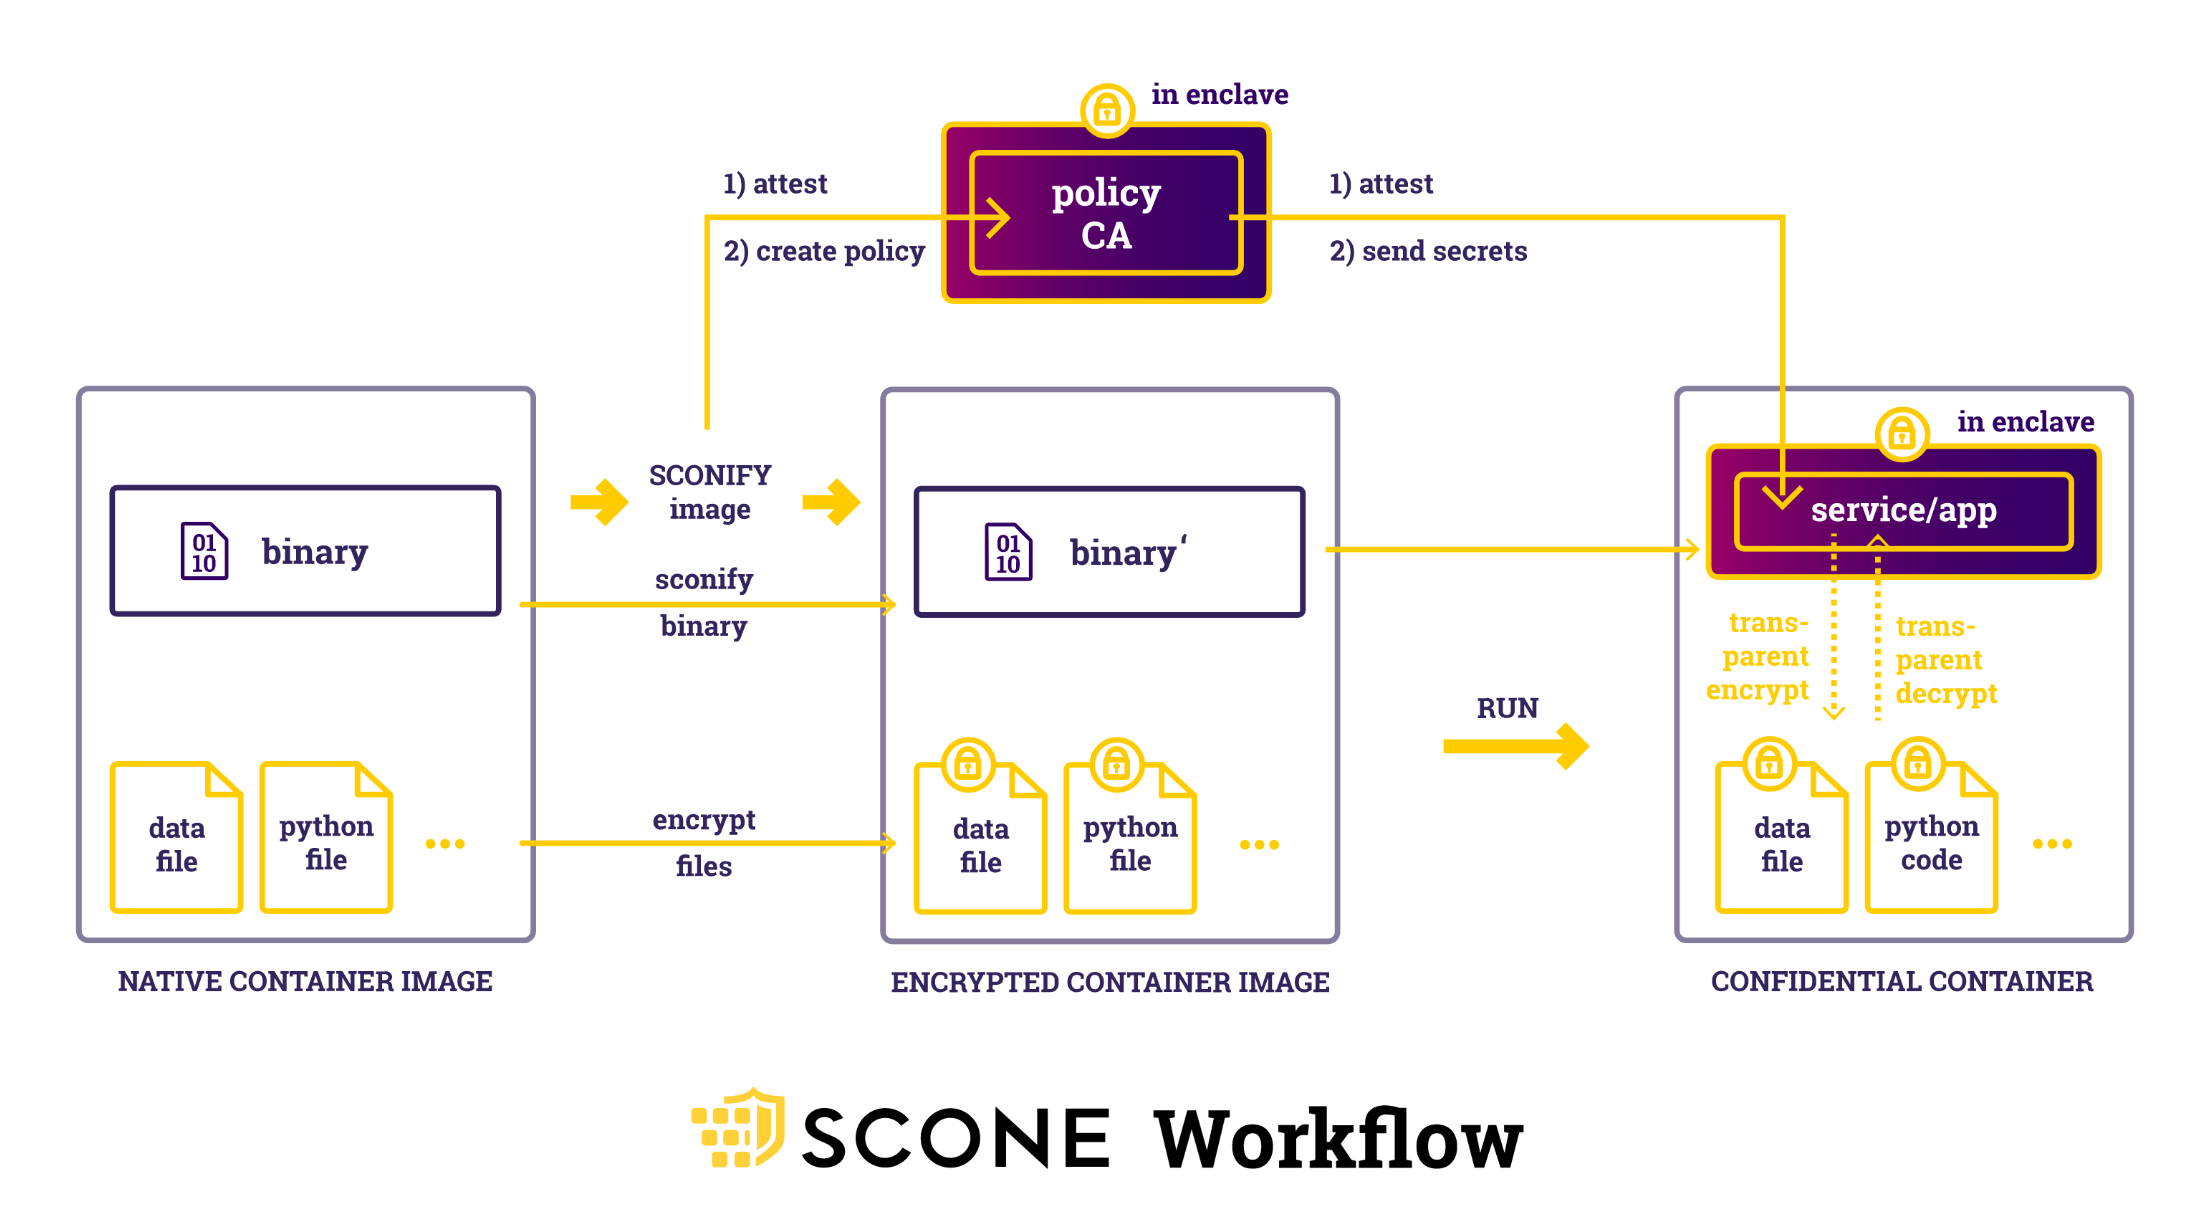 Diagram of SCONE workflow, showing how SCONE processes binary images.